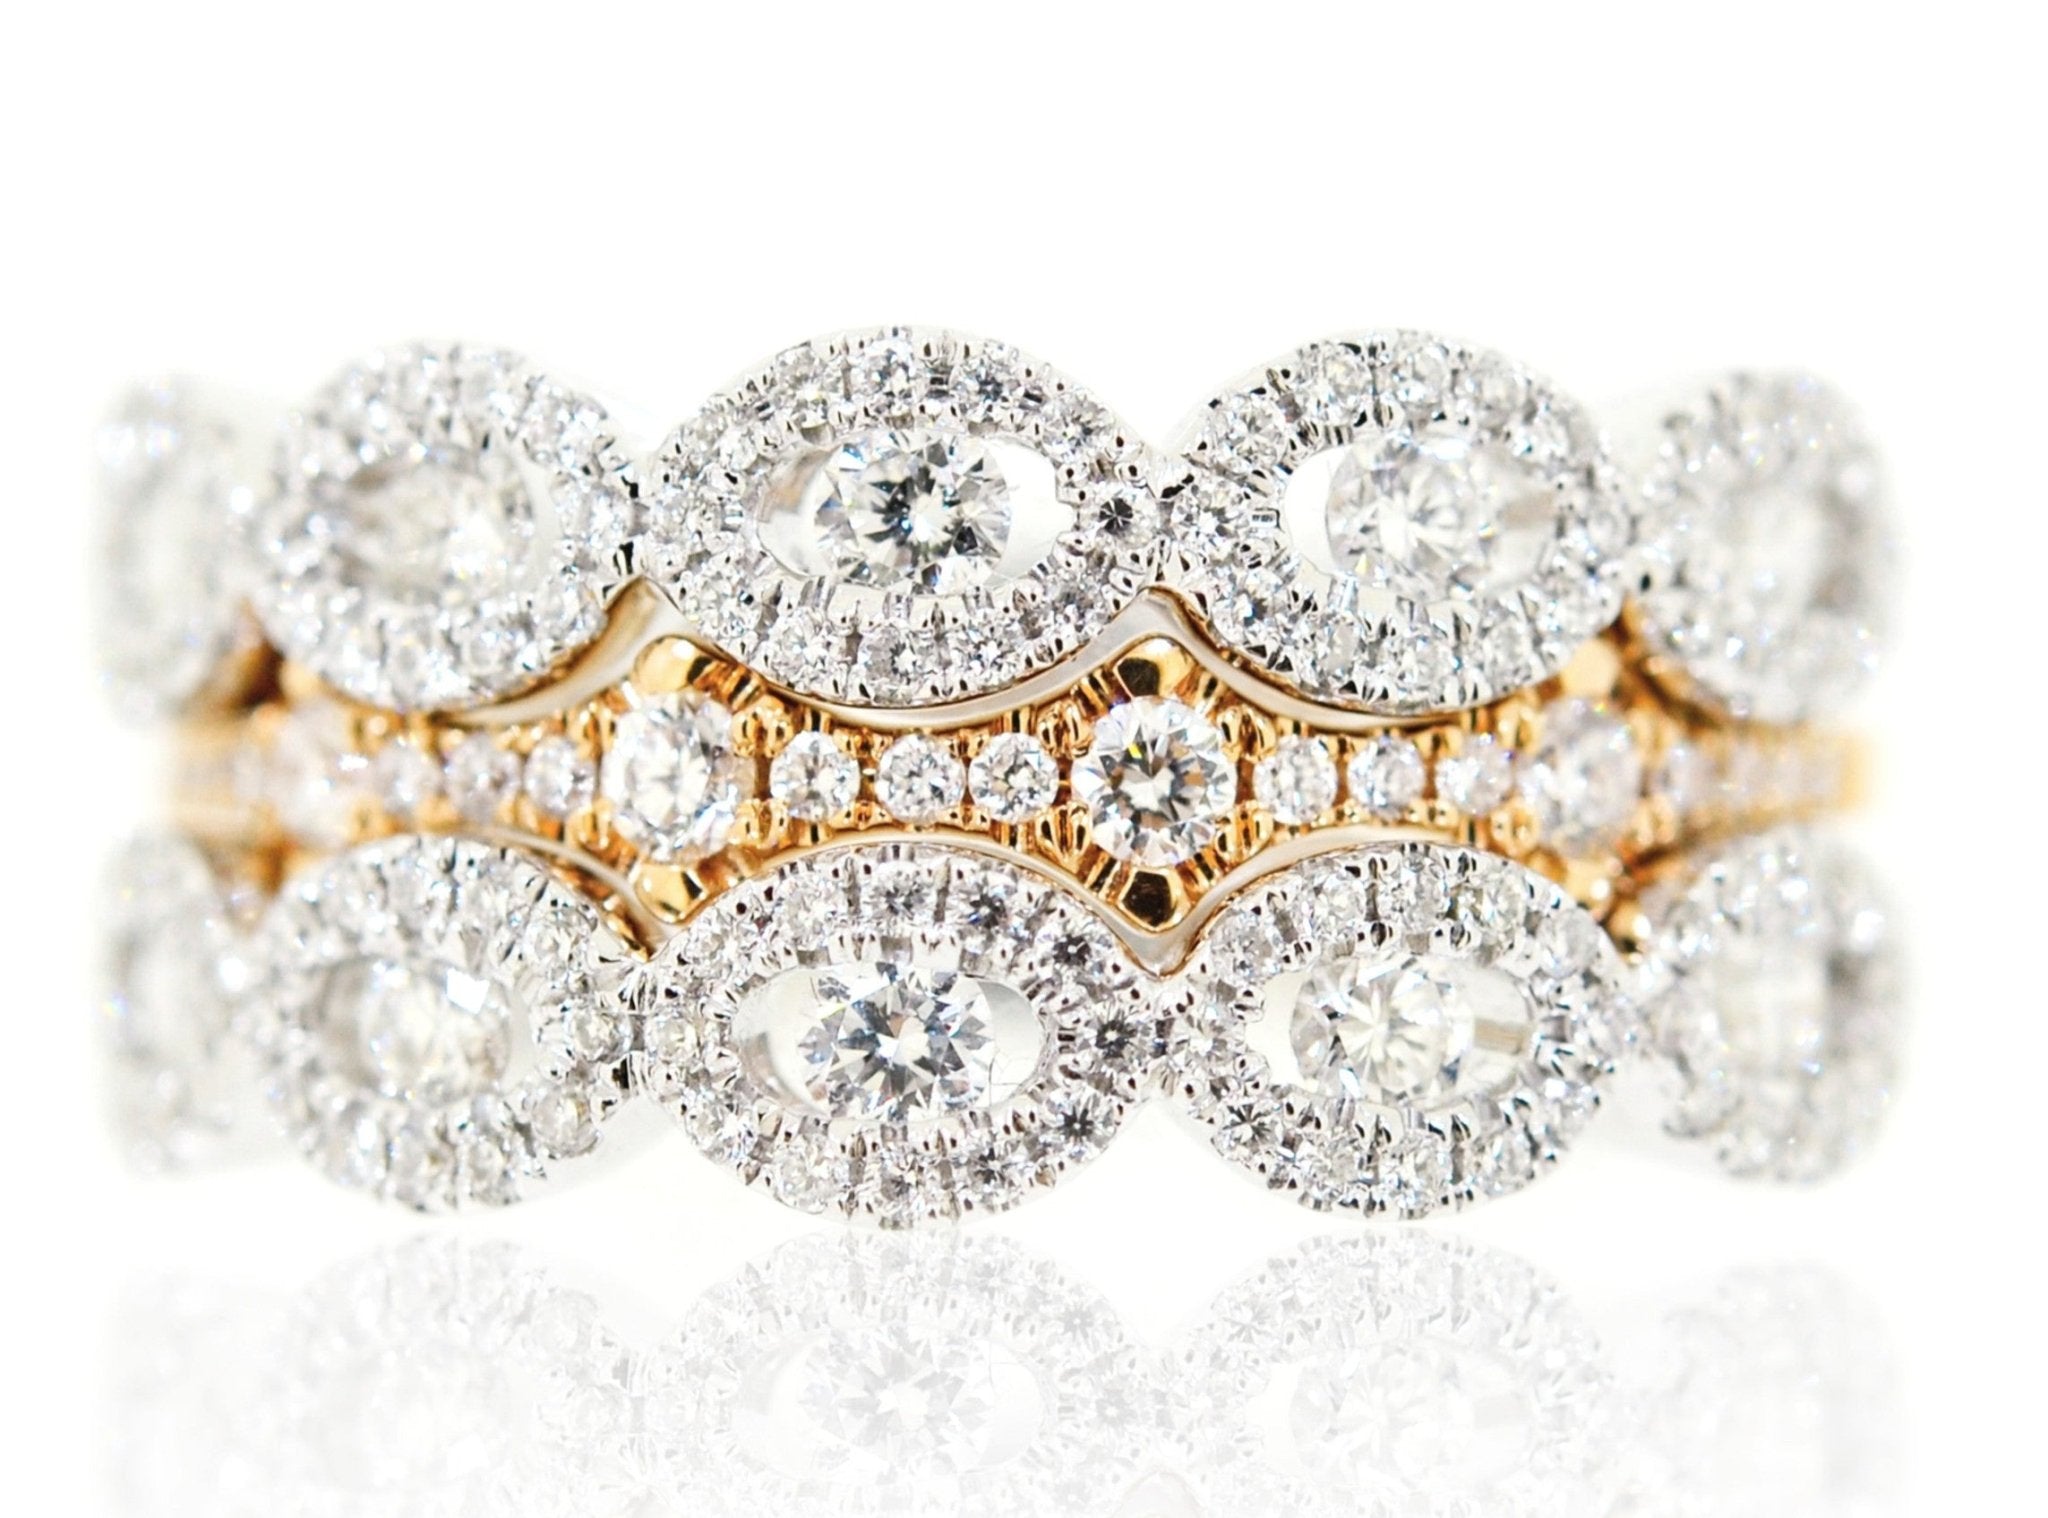 White and Rose Gold Diamond Stackable Rings - ForeverJewels Design Studio 8